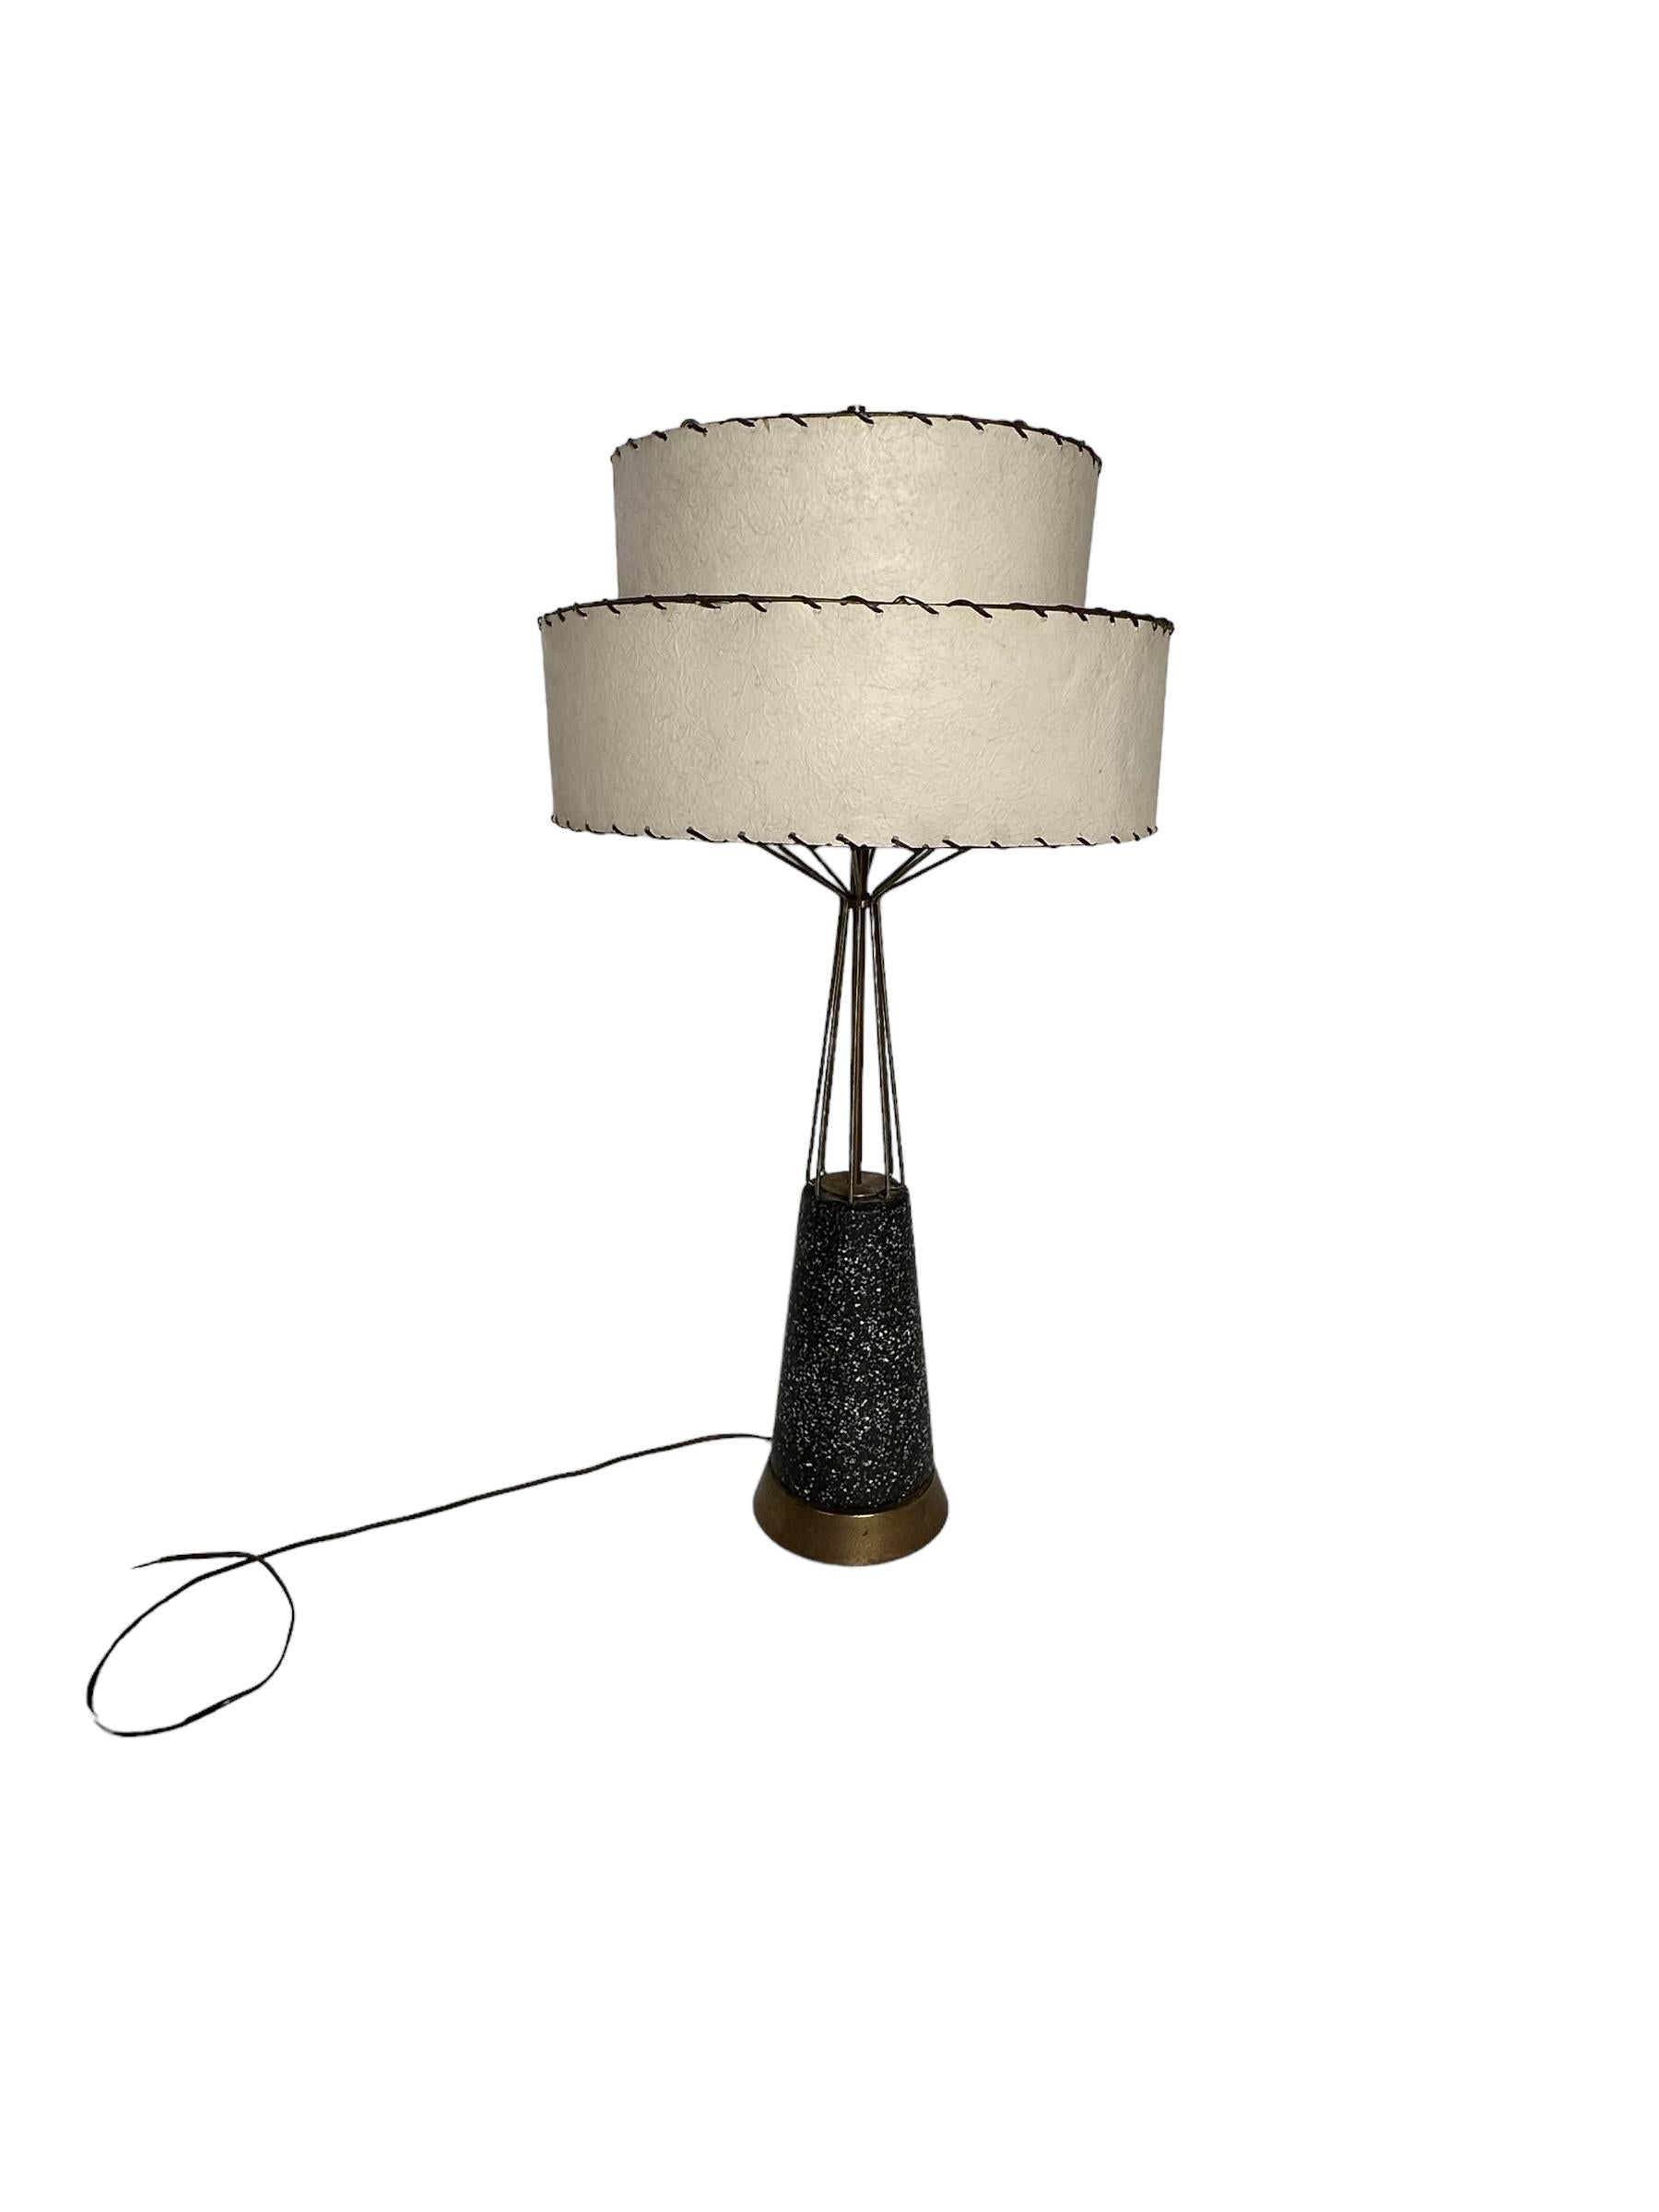 American Mesmerizing Unique Mid-Century Modern Tall Table Lamp For Sale